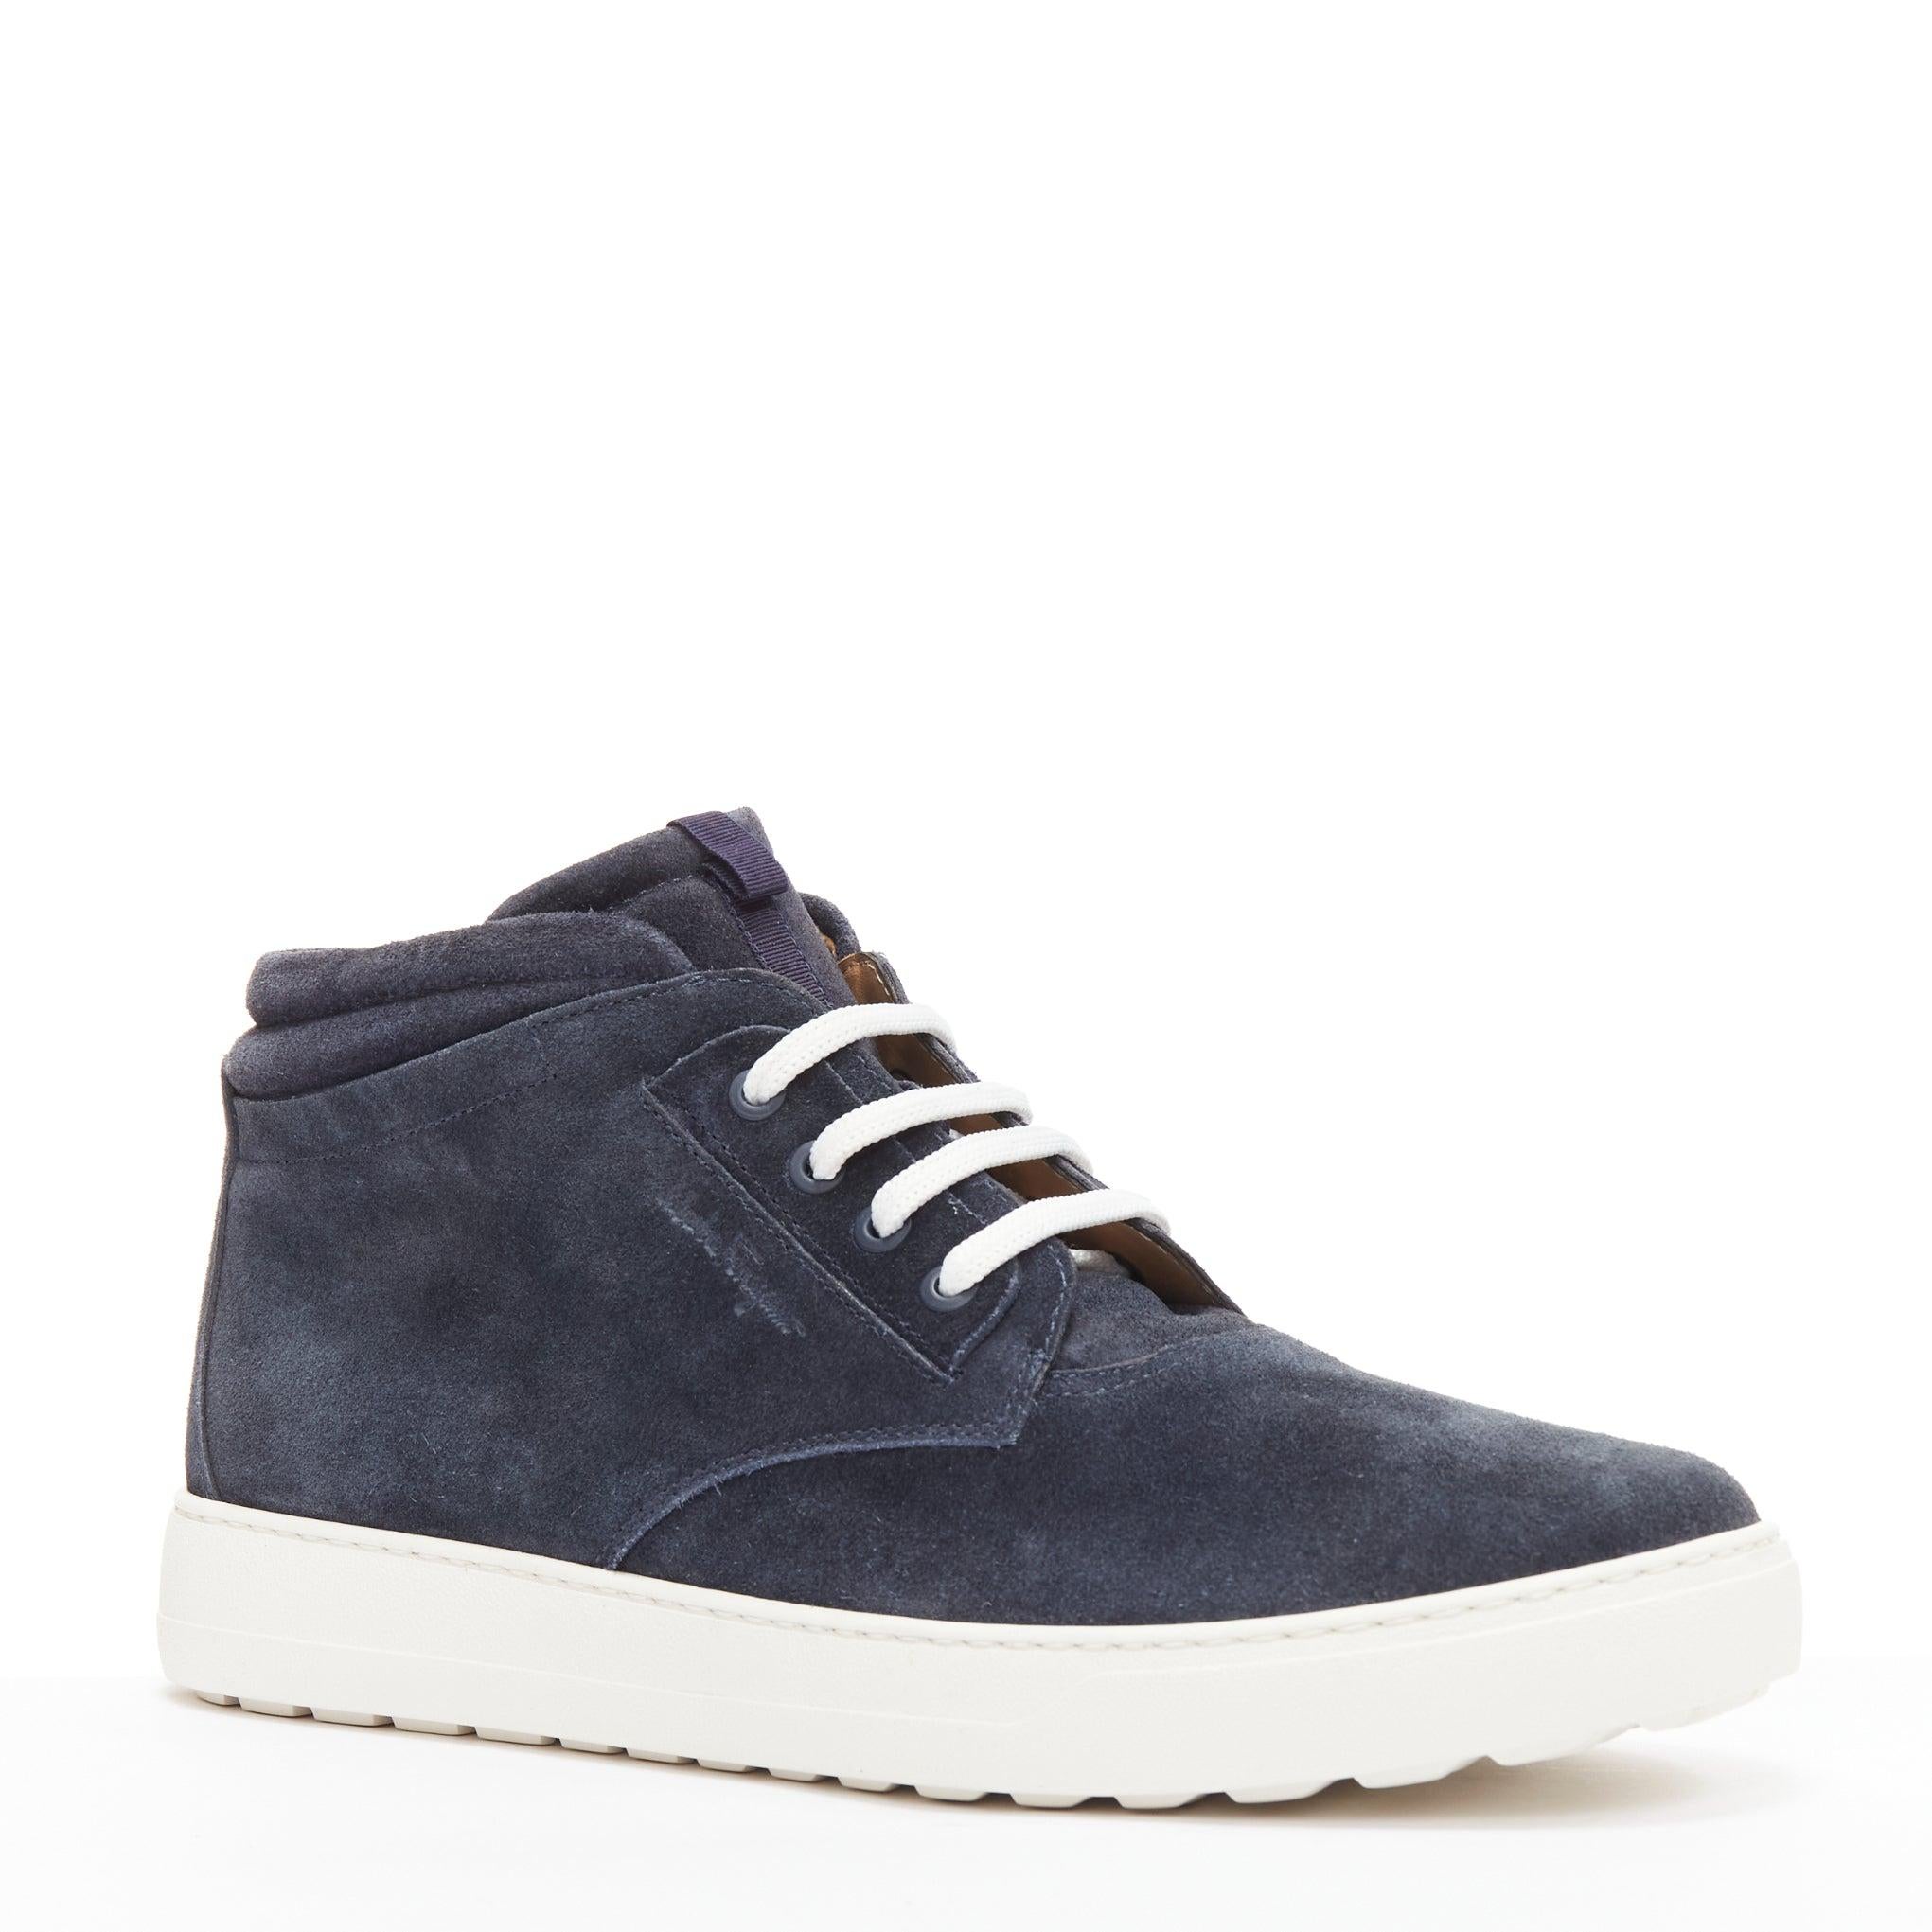 SALVATORE FERRAGAMO navy suede logo deboss high top sneakers UK8.5 EU42.5
Reference: LNKO/A02296
Brand: Salvatore Ferragamo
Material: Suede
Color: Navy, White
Pattern: Solid
Closure: Lace Up
Lining: Nude Leather
Extra Details: Discreet logo scribble